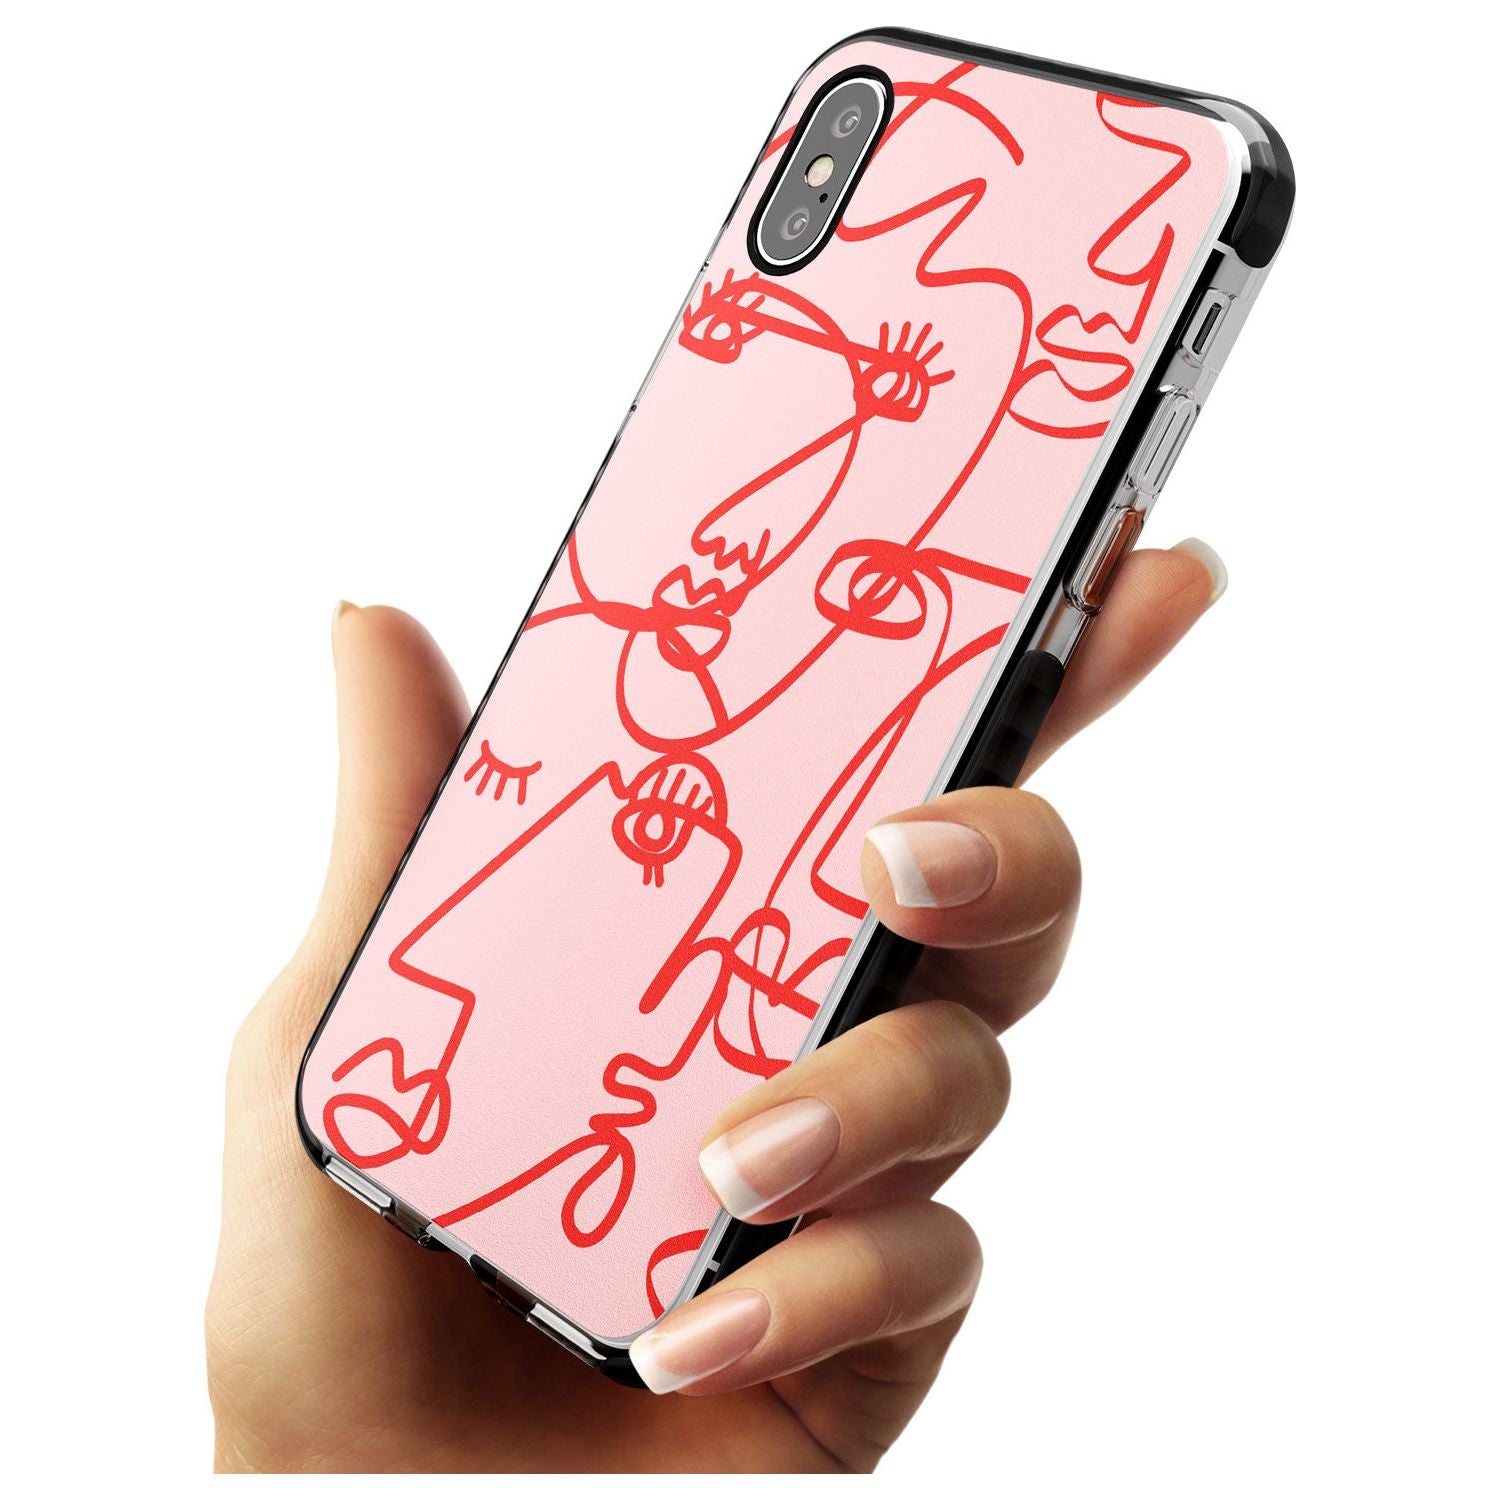 Continuous Line Faces: Red on Pink Pink Fade Impact Phone Case for iPhone X XS Max XR